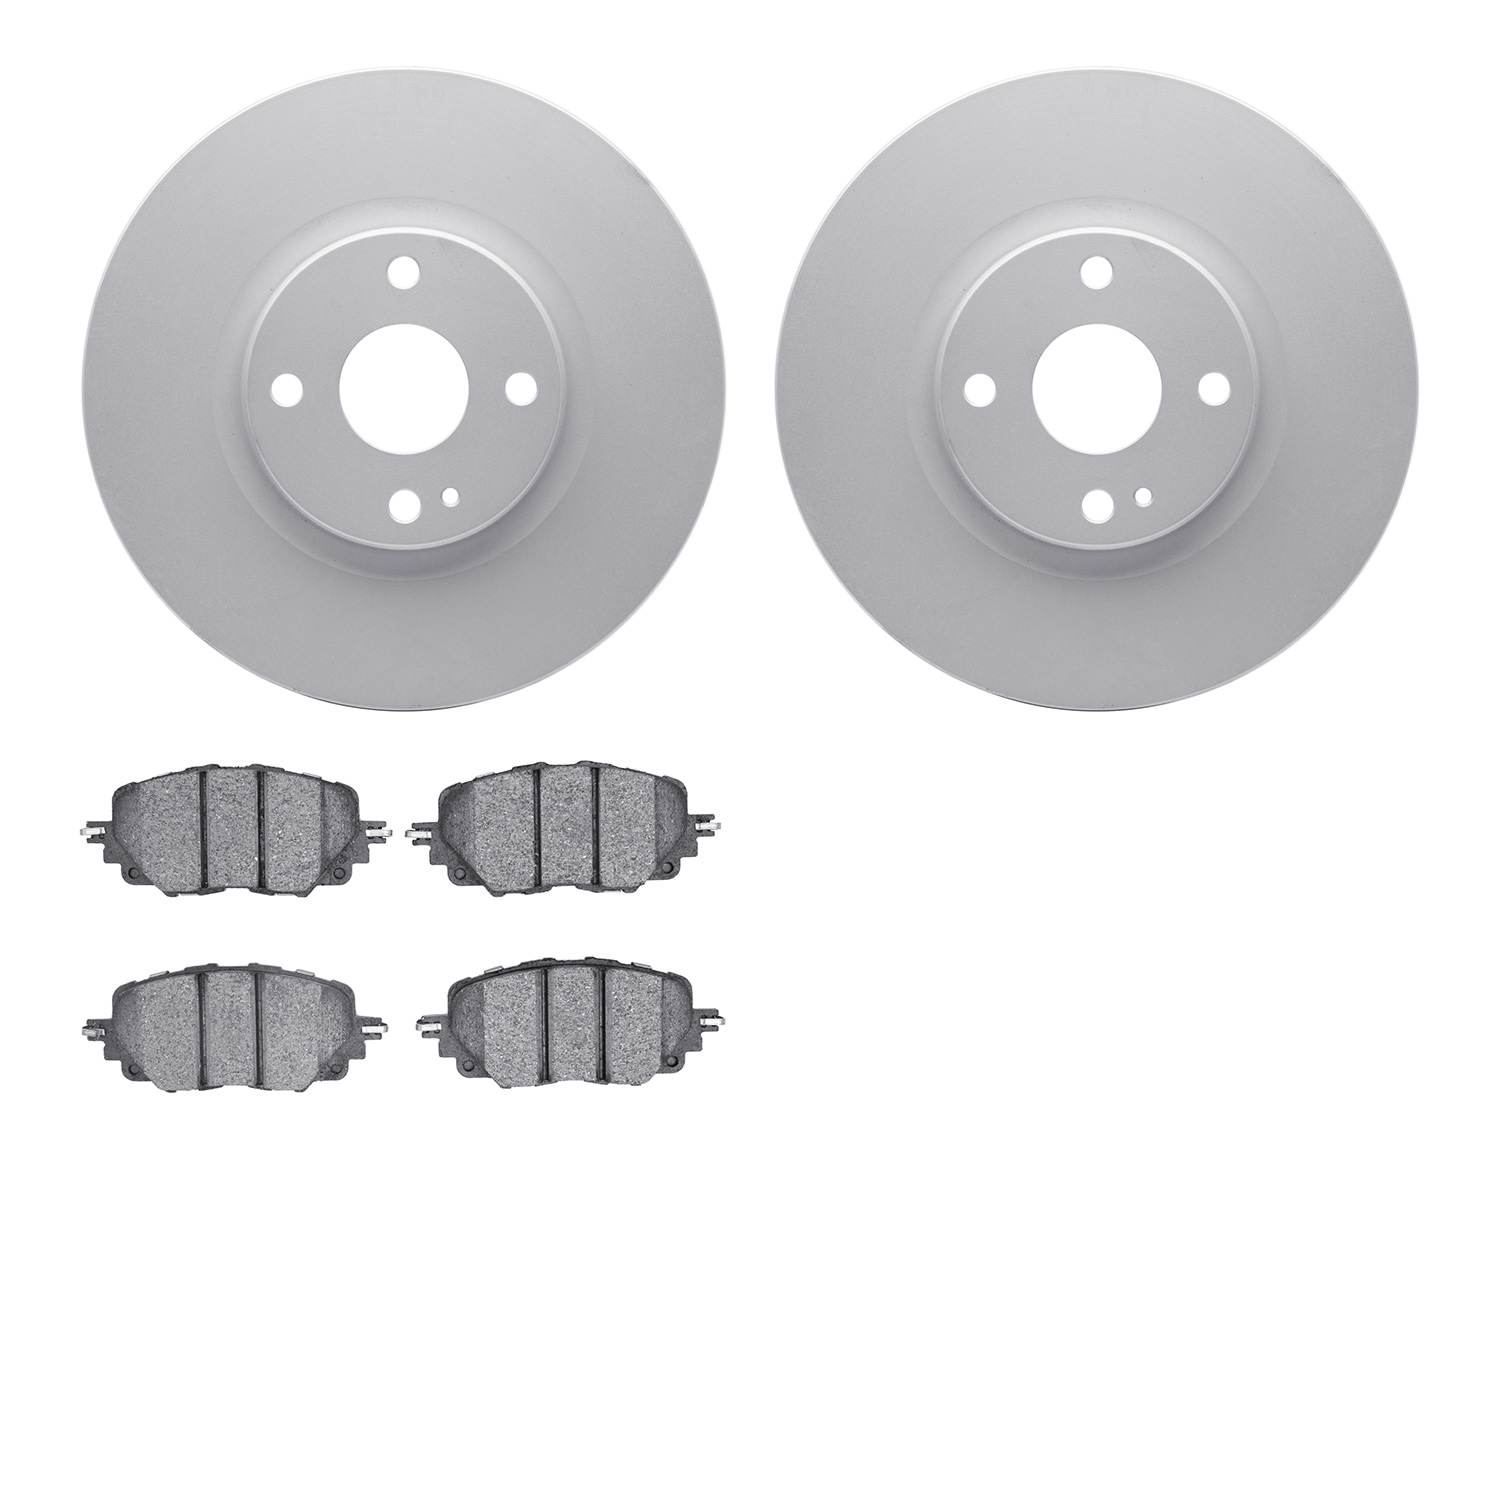 4302-80045 Geospec Brake Rotors with 3000-Series Ceramic Brake Pads Kit, Fits Select Multiple Makes/Models, Position: Front